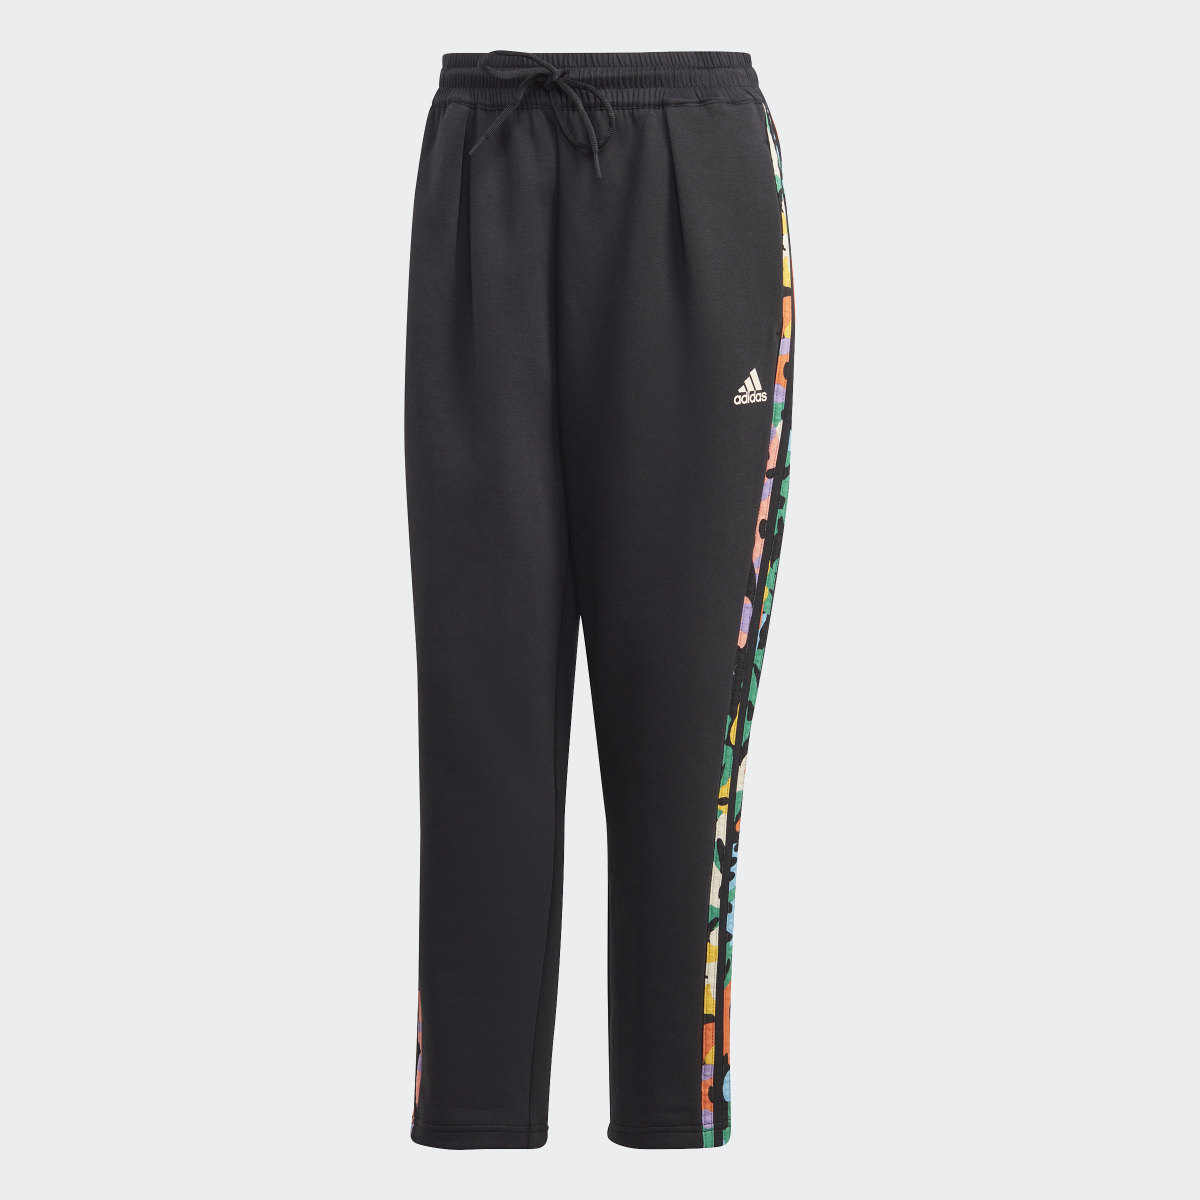 Adidas Graphic Tracksuit Bottoms. 4